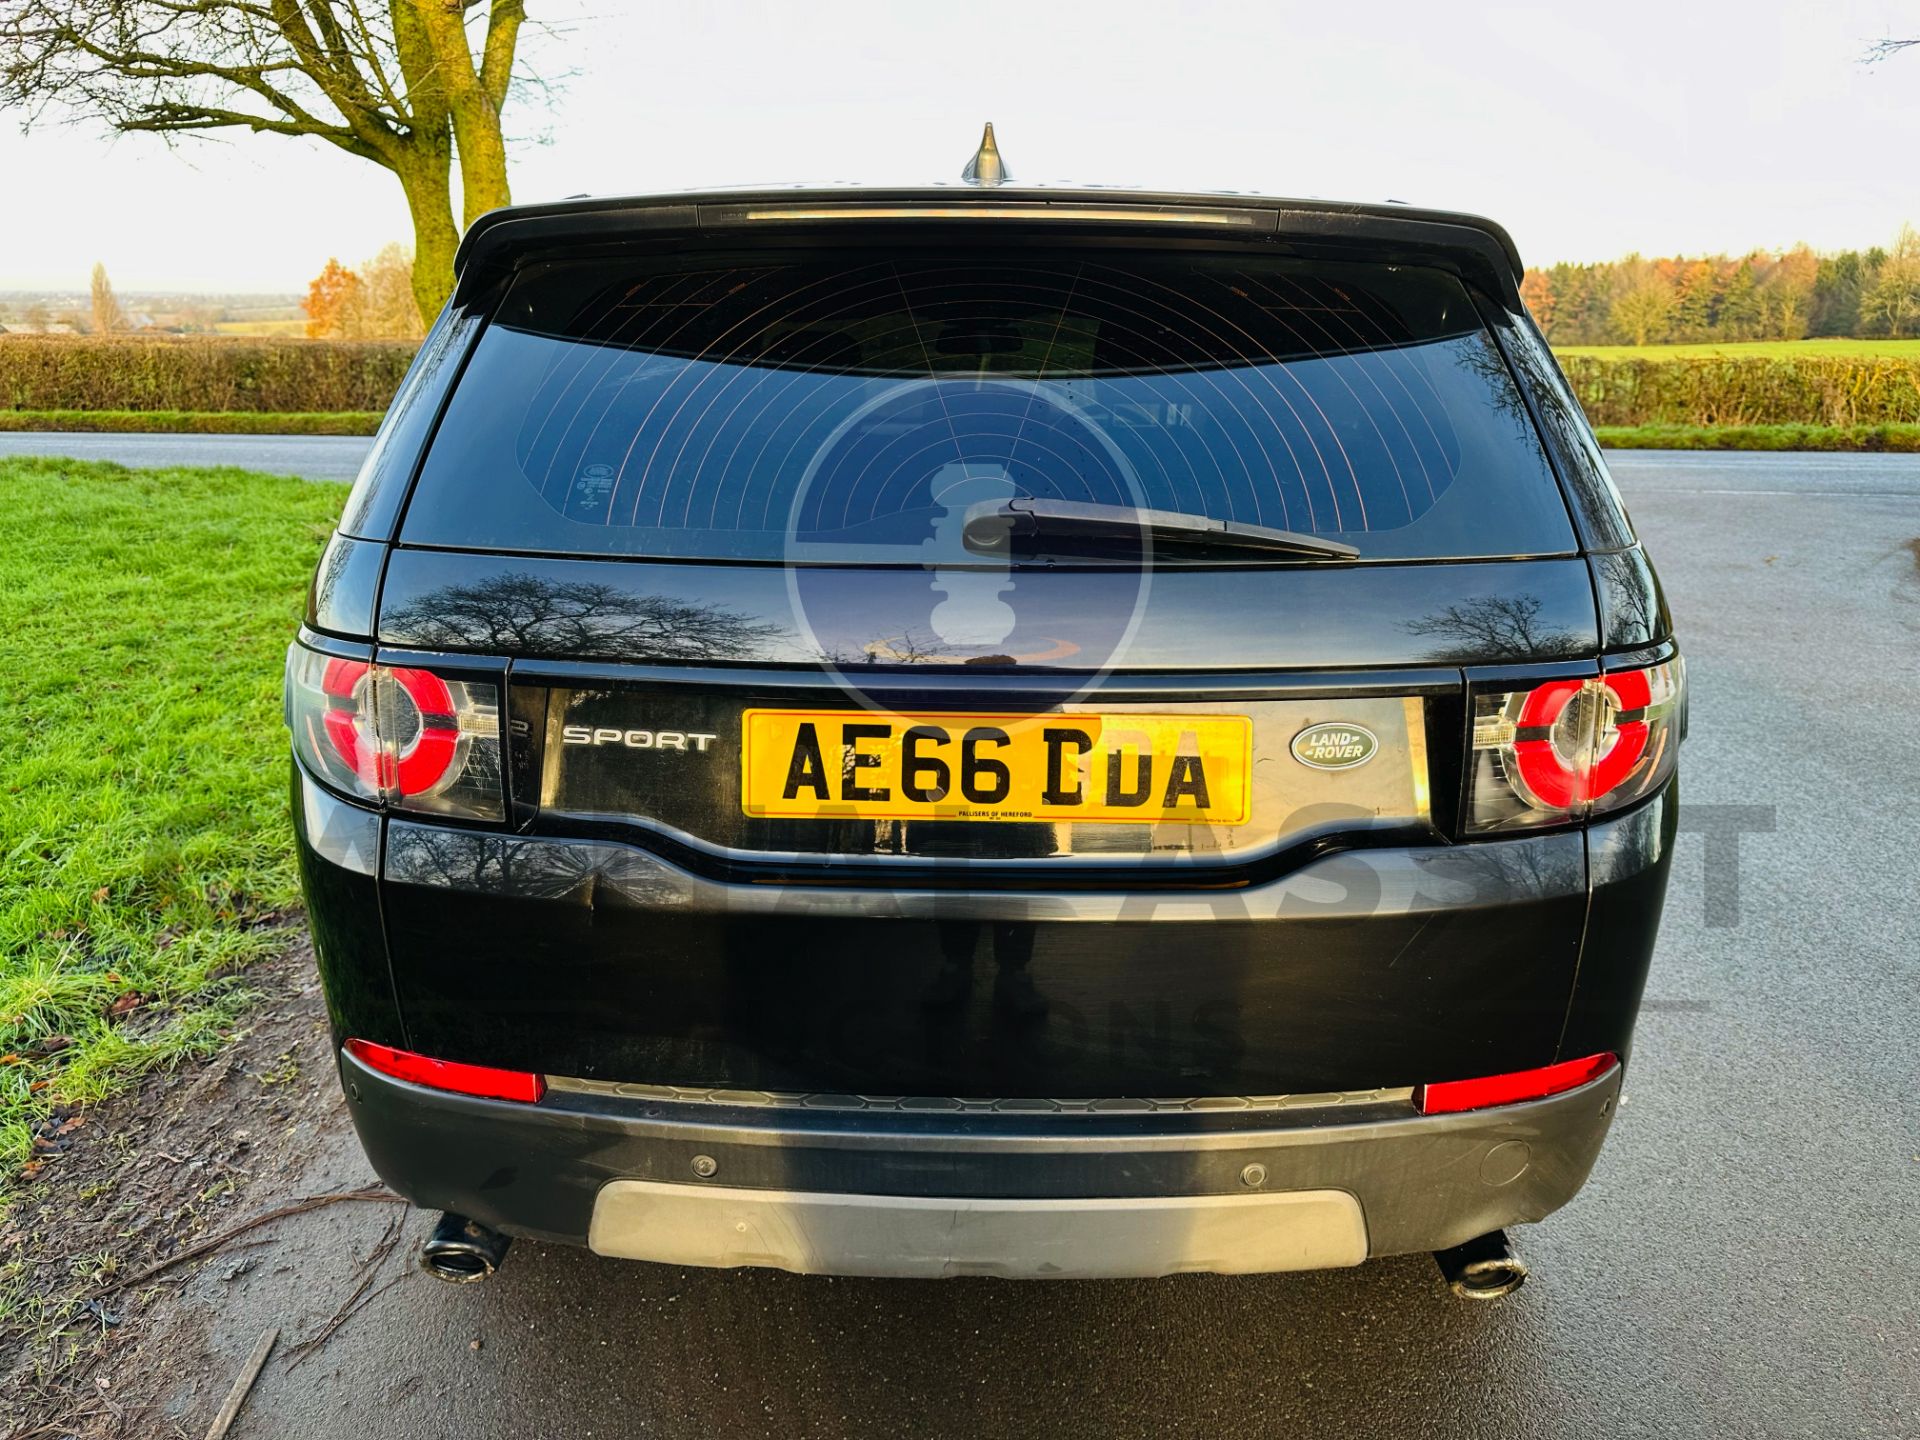 (On Sale) LAND ROVER DISCOVERY SPORT *SE EDITION* (2017 MODEL) - 7 SEATER - AIR CON - EURO 6 - Image 12 of 41